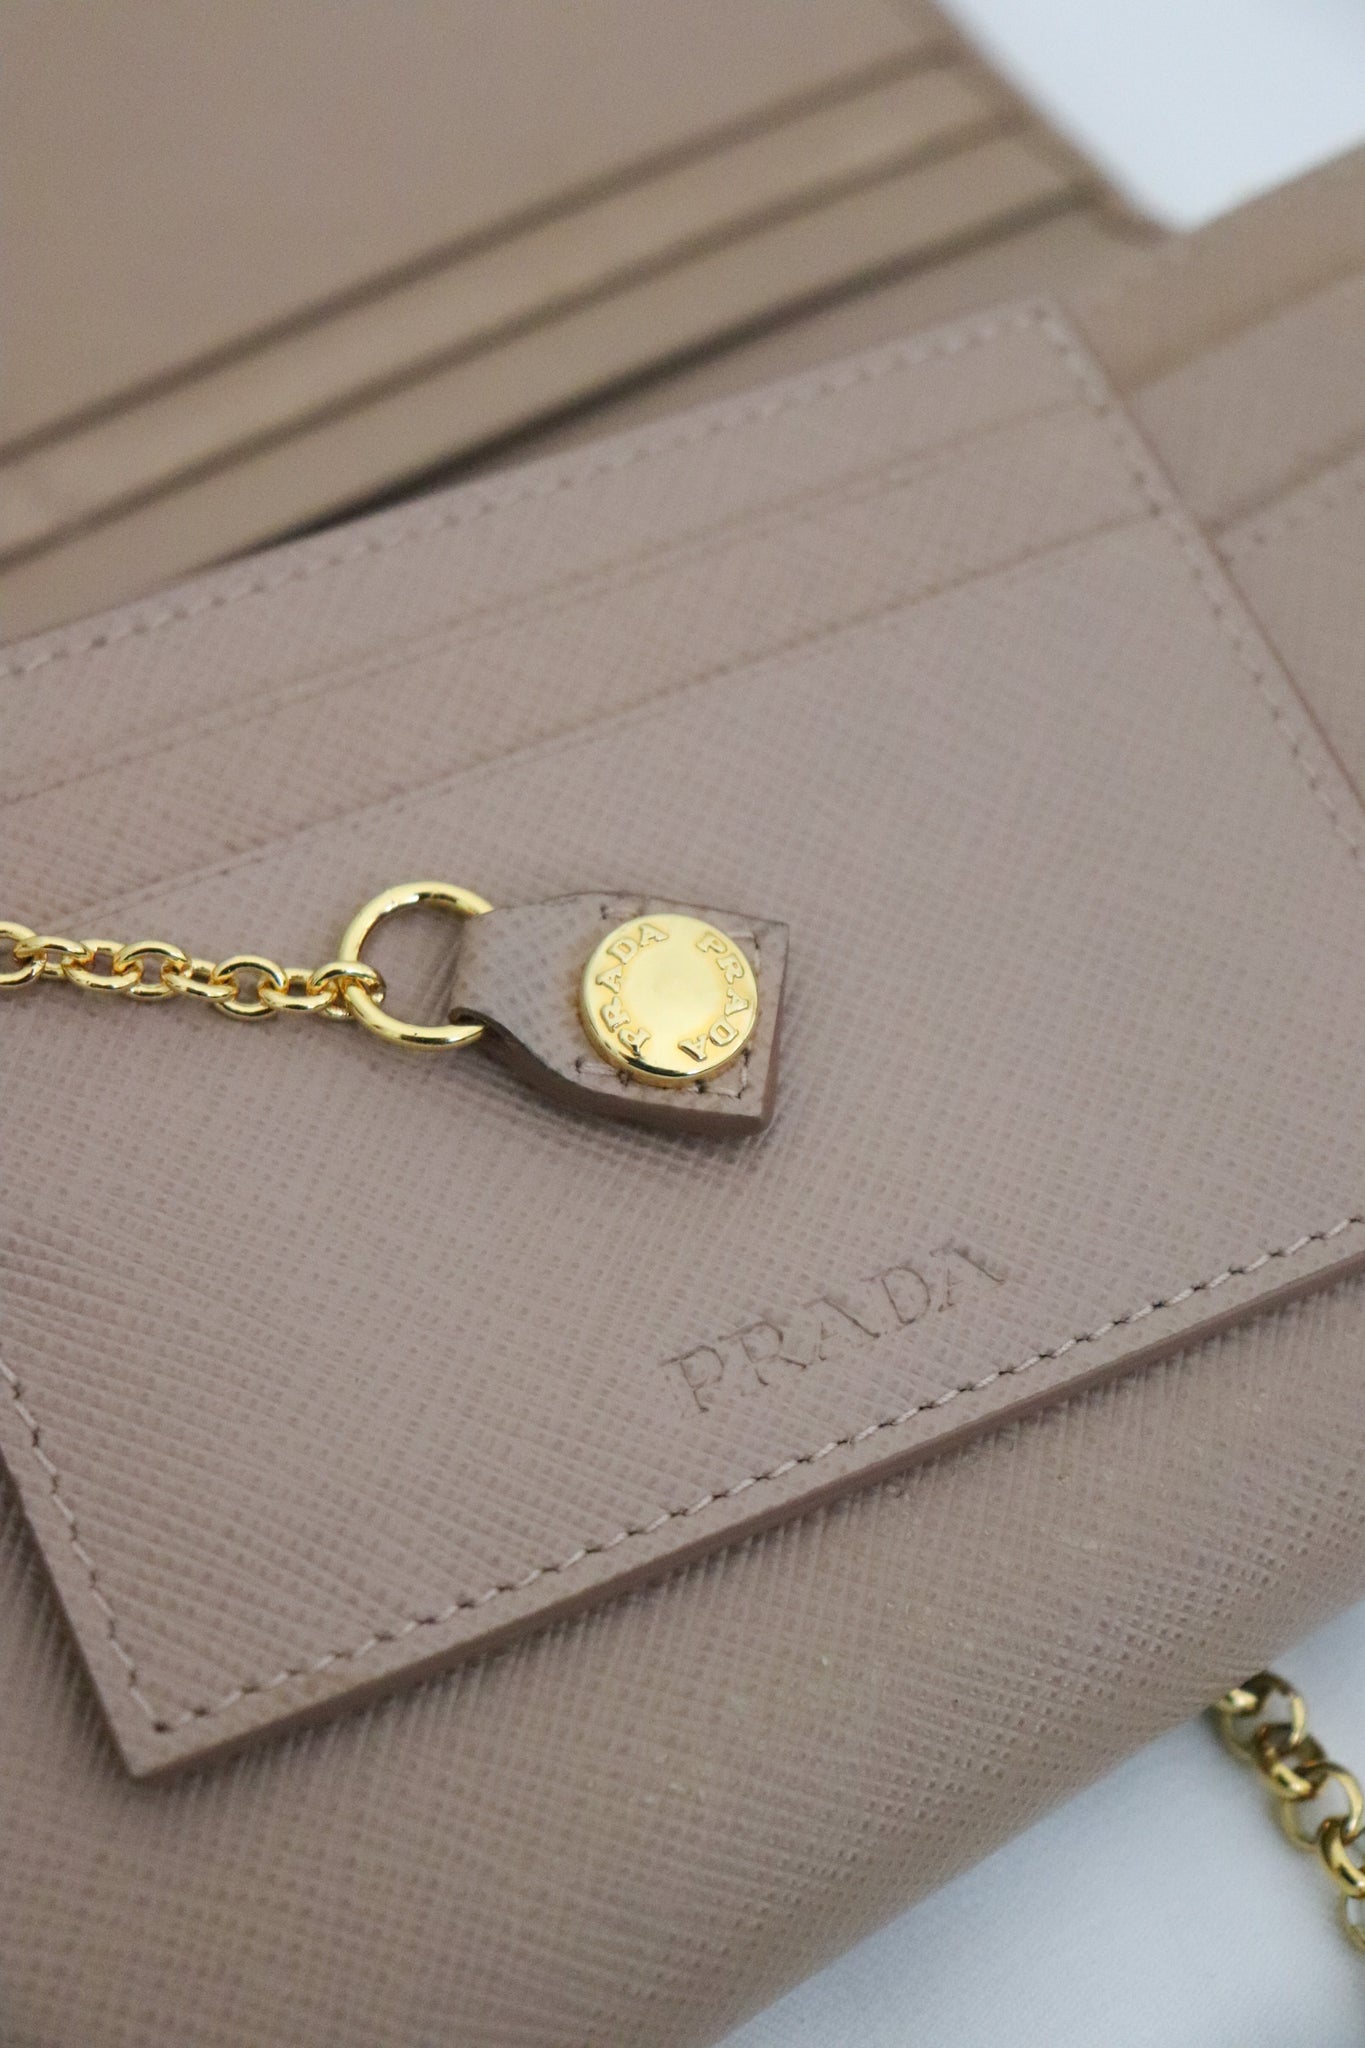 PRADA Saffiano Leather Flap Wallet With Metal Bar Detail, Luxury